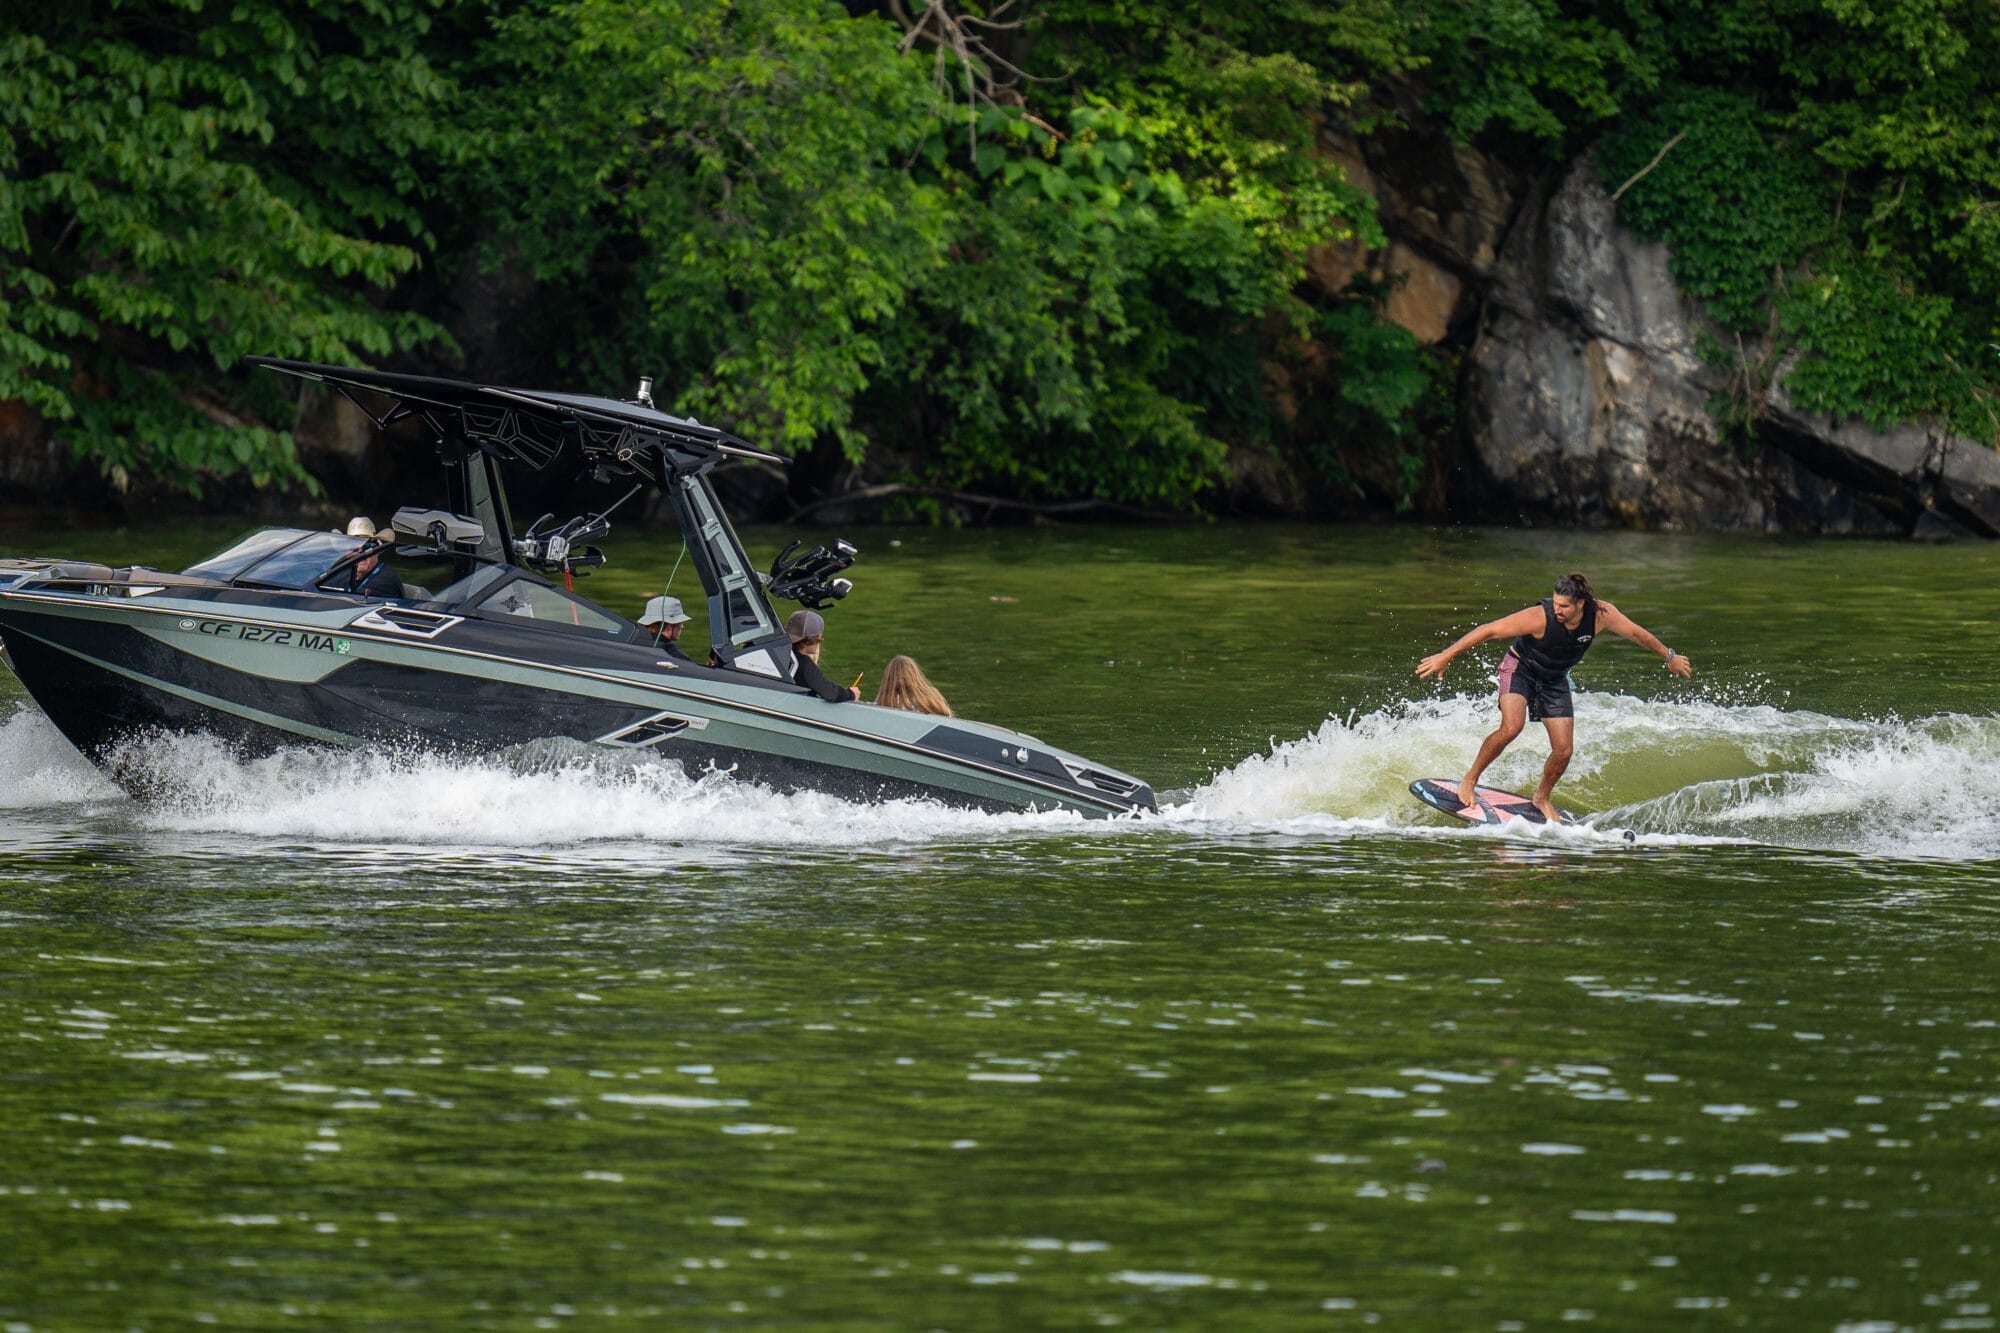 A person is wakesurfing behind a black boat with several passengers on a green, tree-lined body of water.